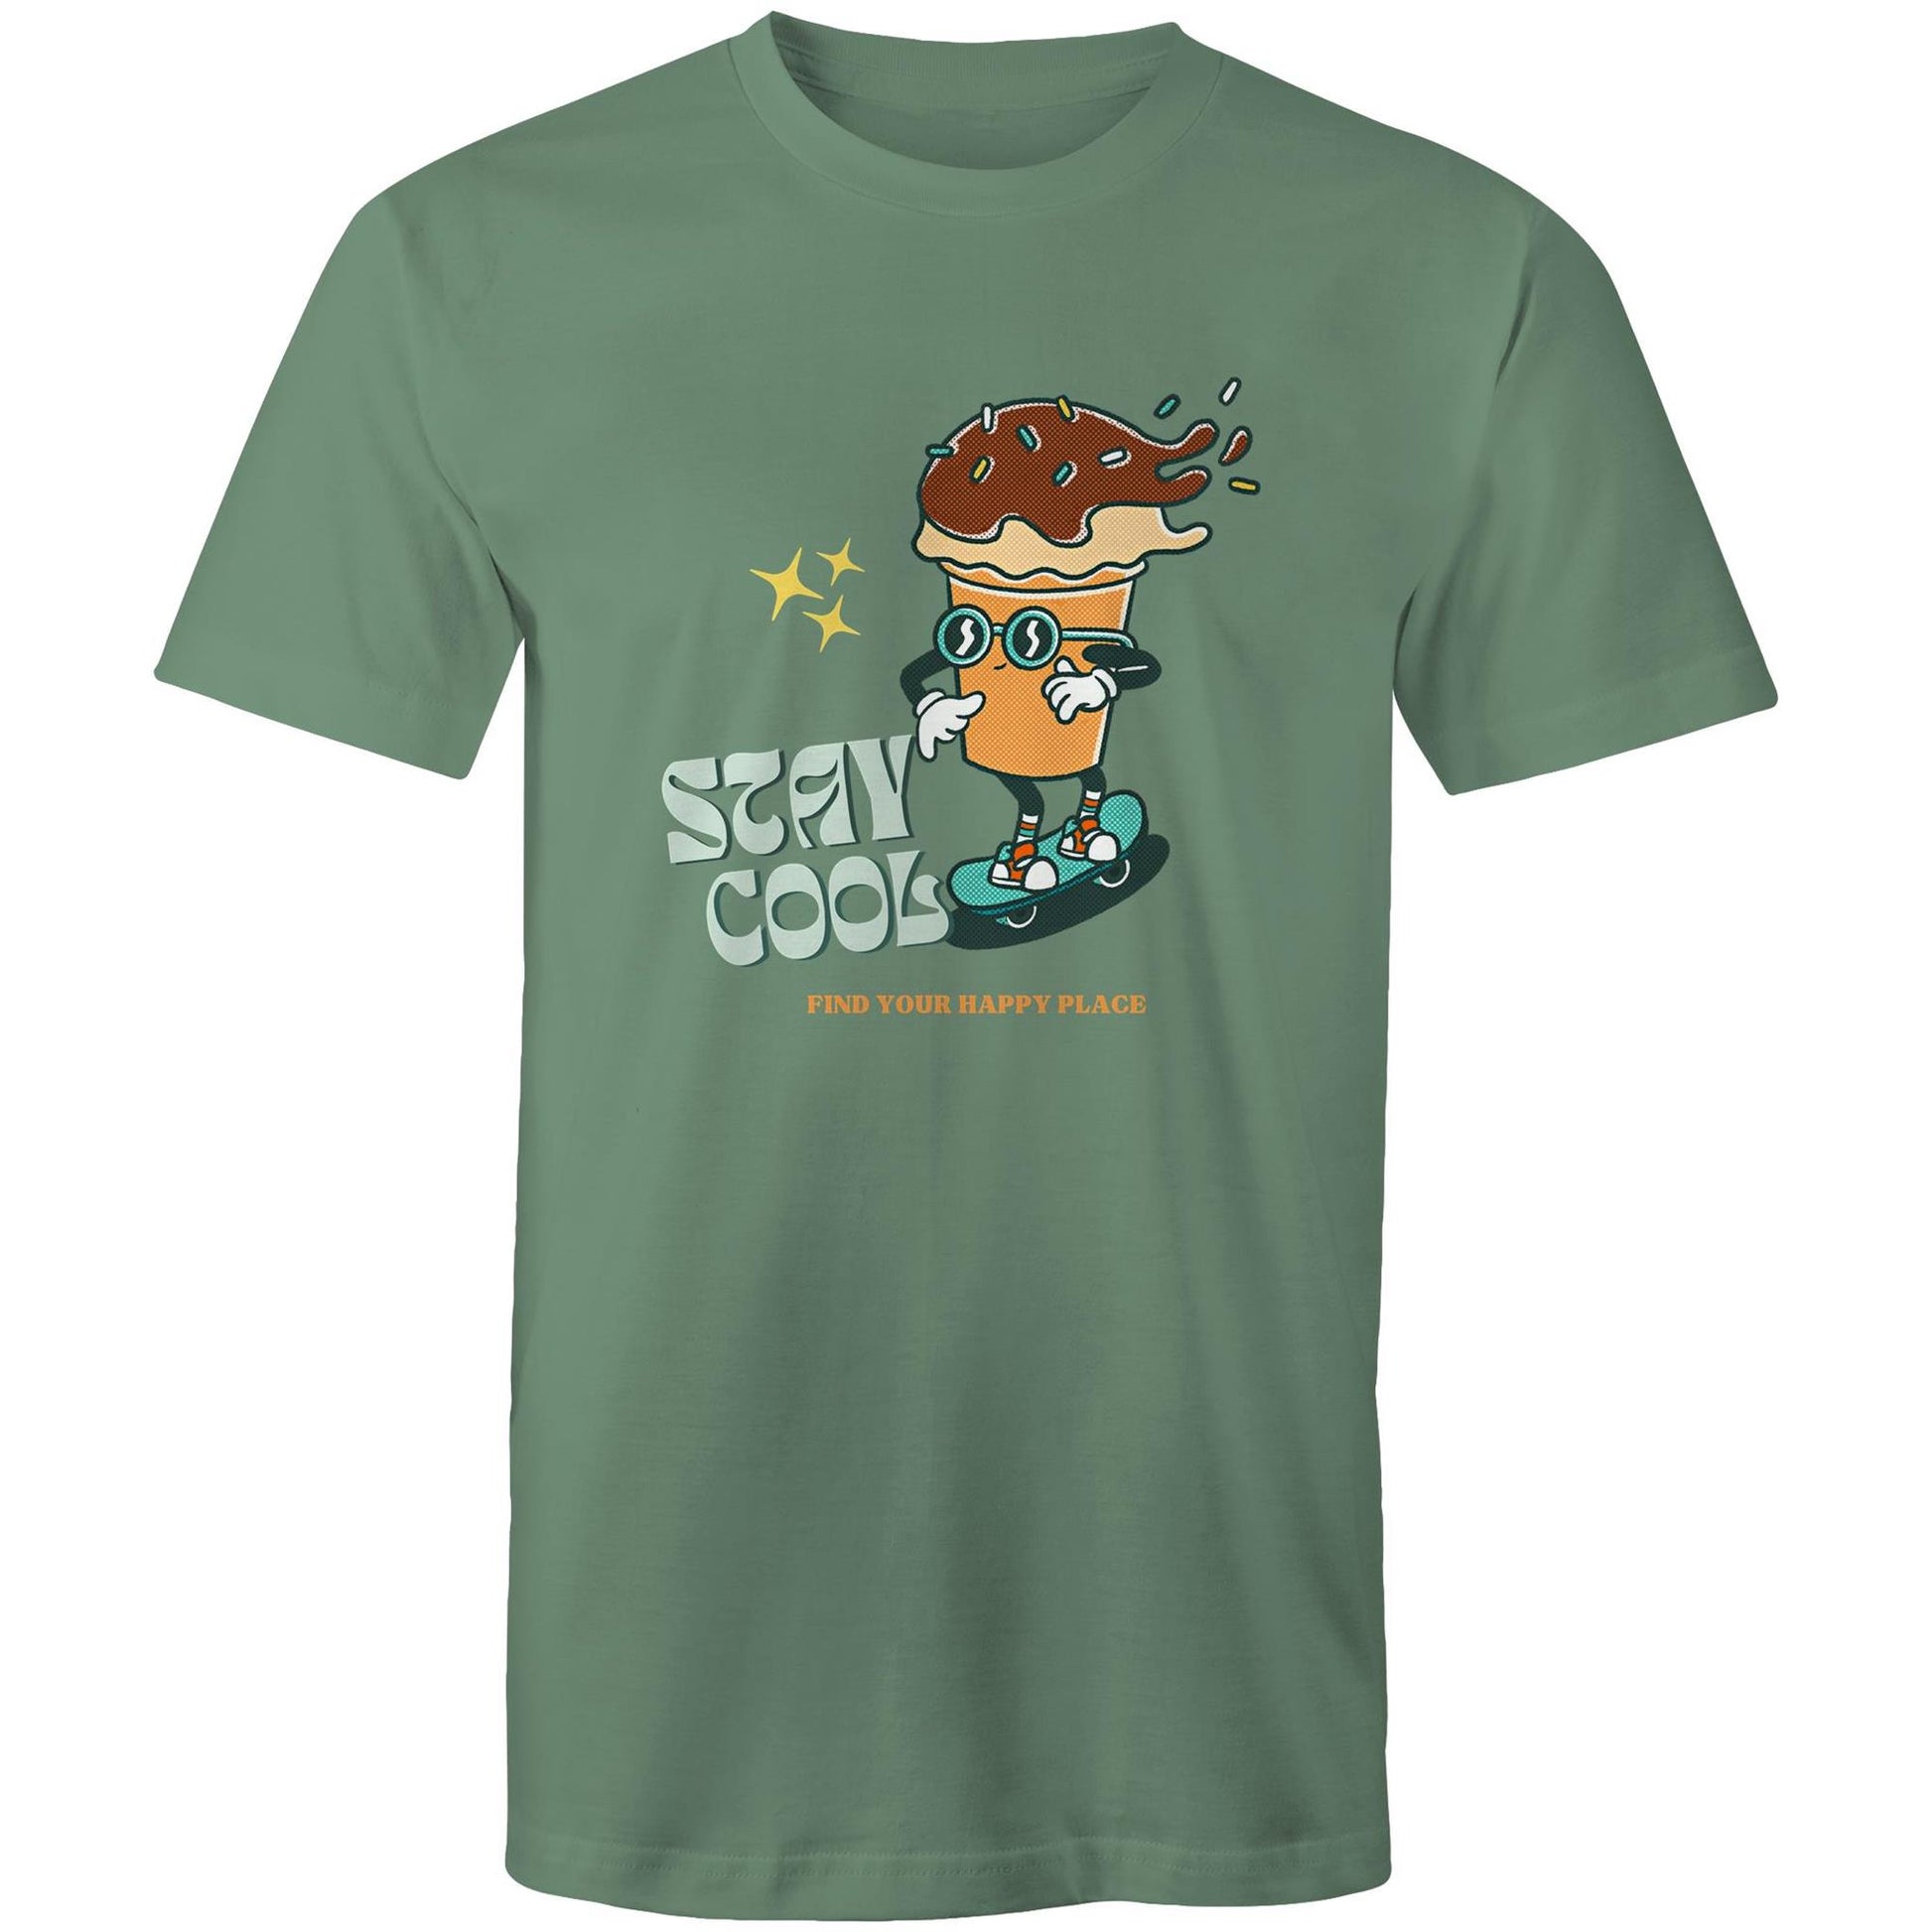 Stay Cool, Find Your Happy Place - Mens T-Shirt Sage Mens T-shirt Retro Summer